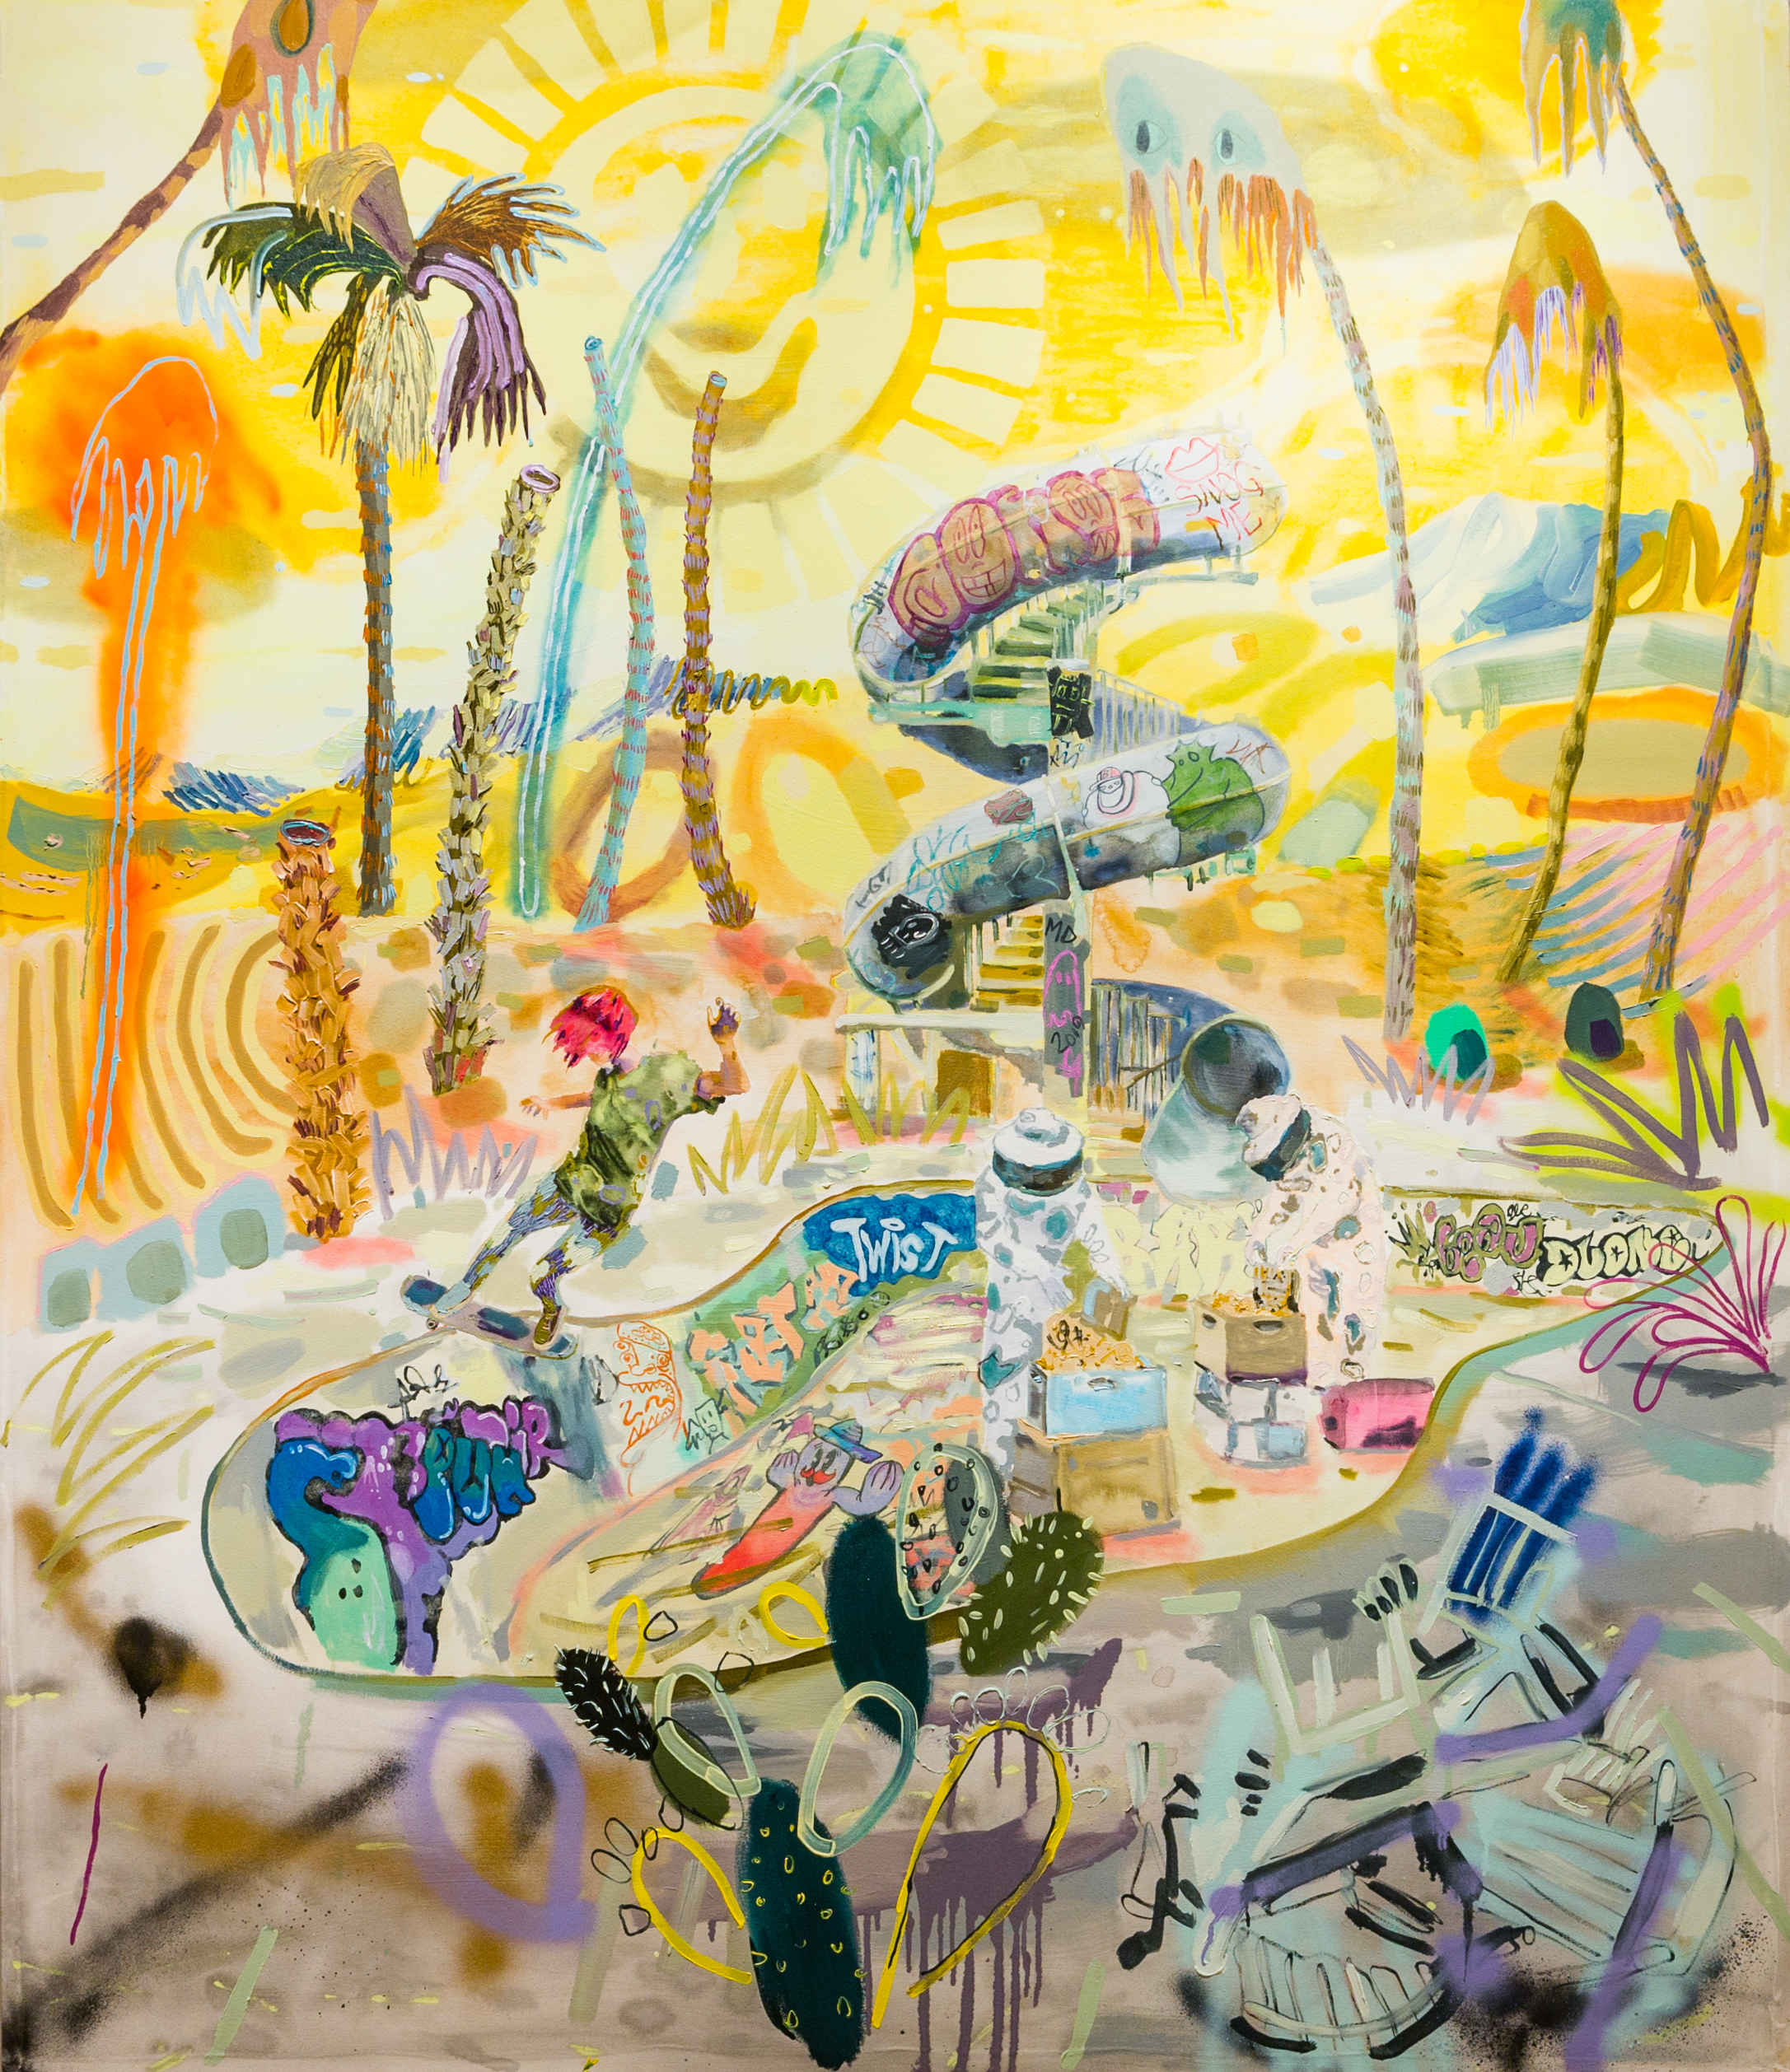 Honeygrind, 2019, oil on canvas, 85 X 70 inches